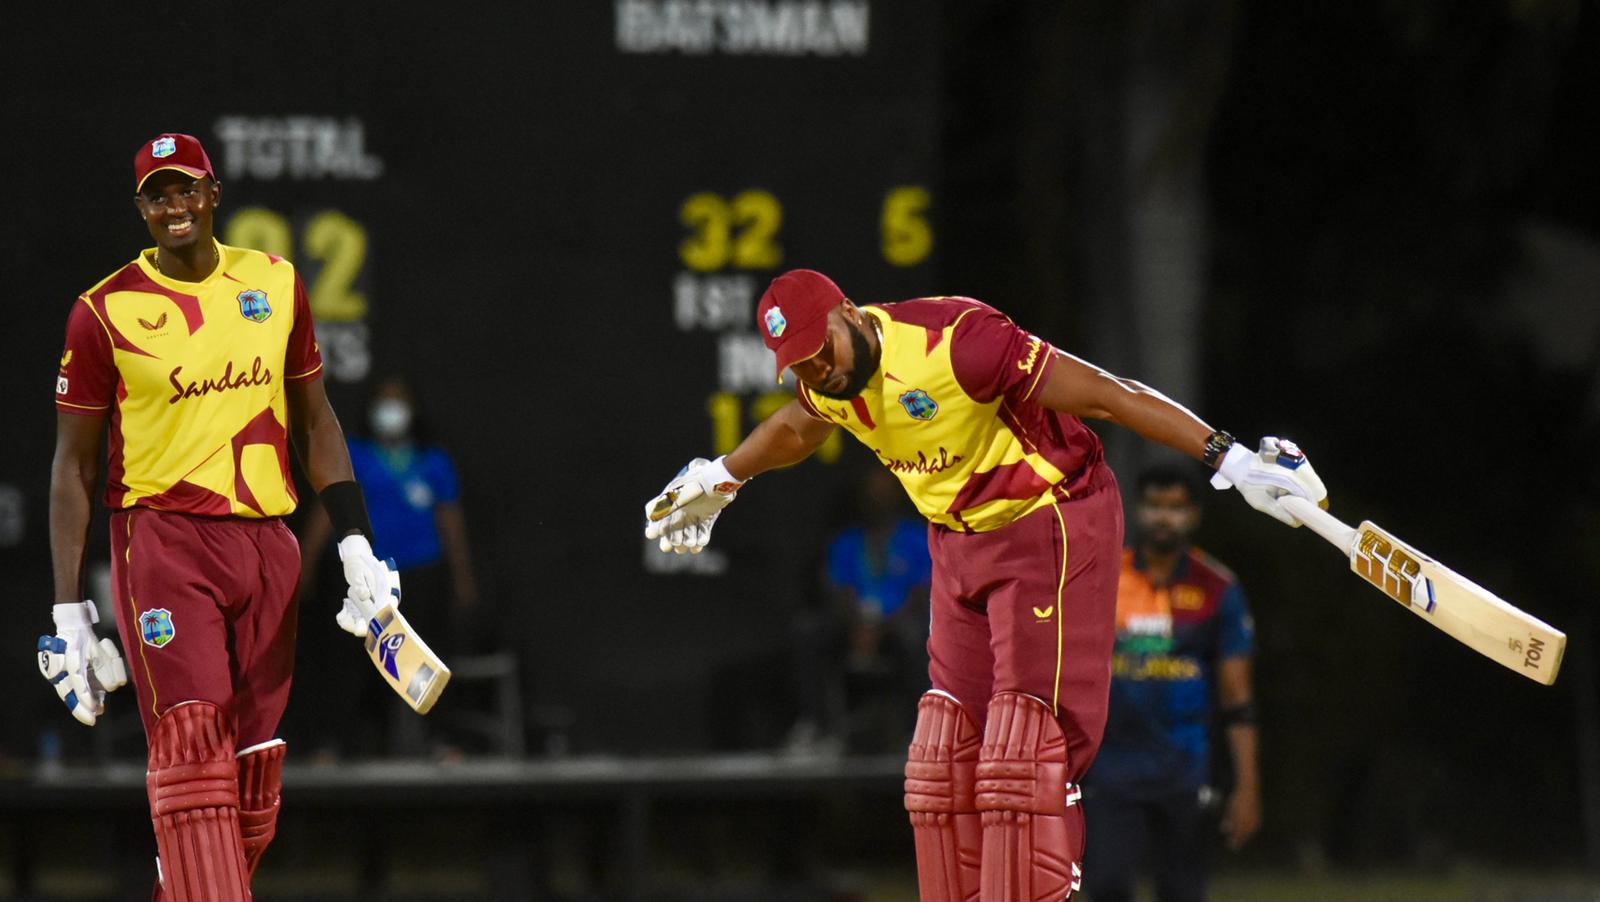 Pollard smashed 6 sixes in an over | WI Cricket Twitter